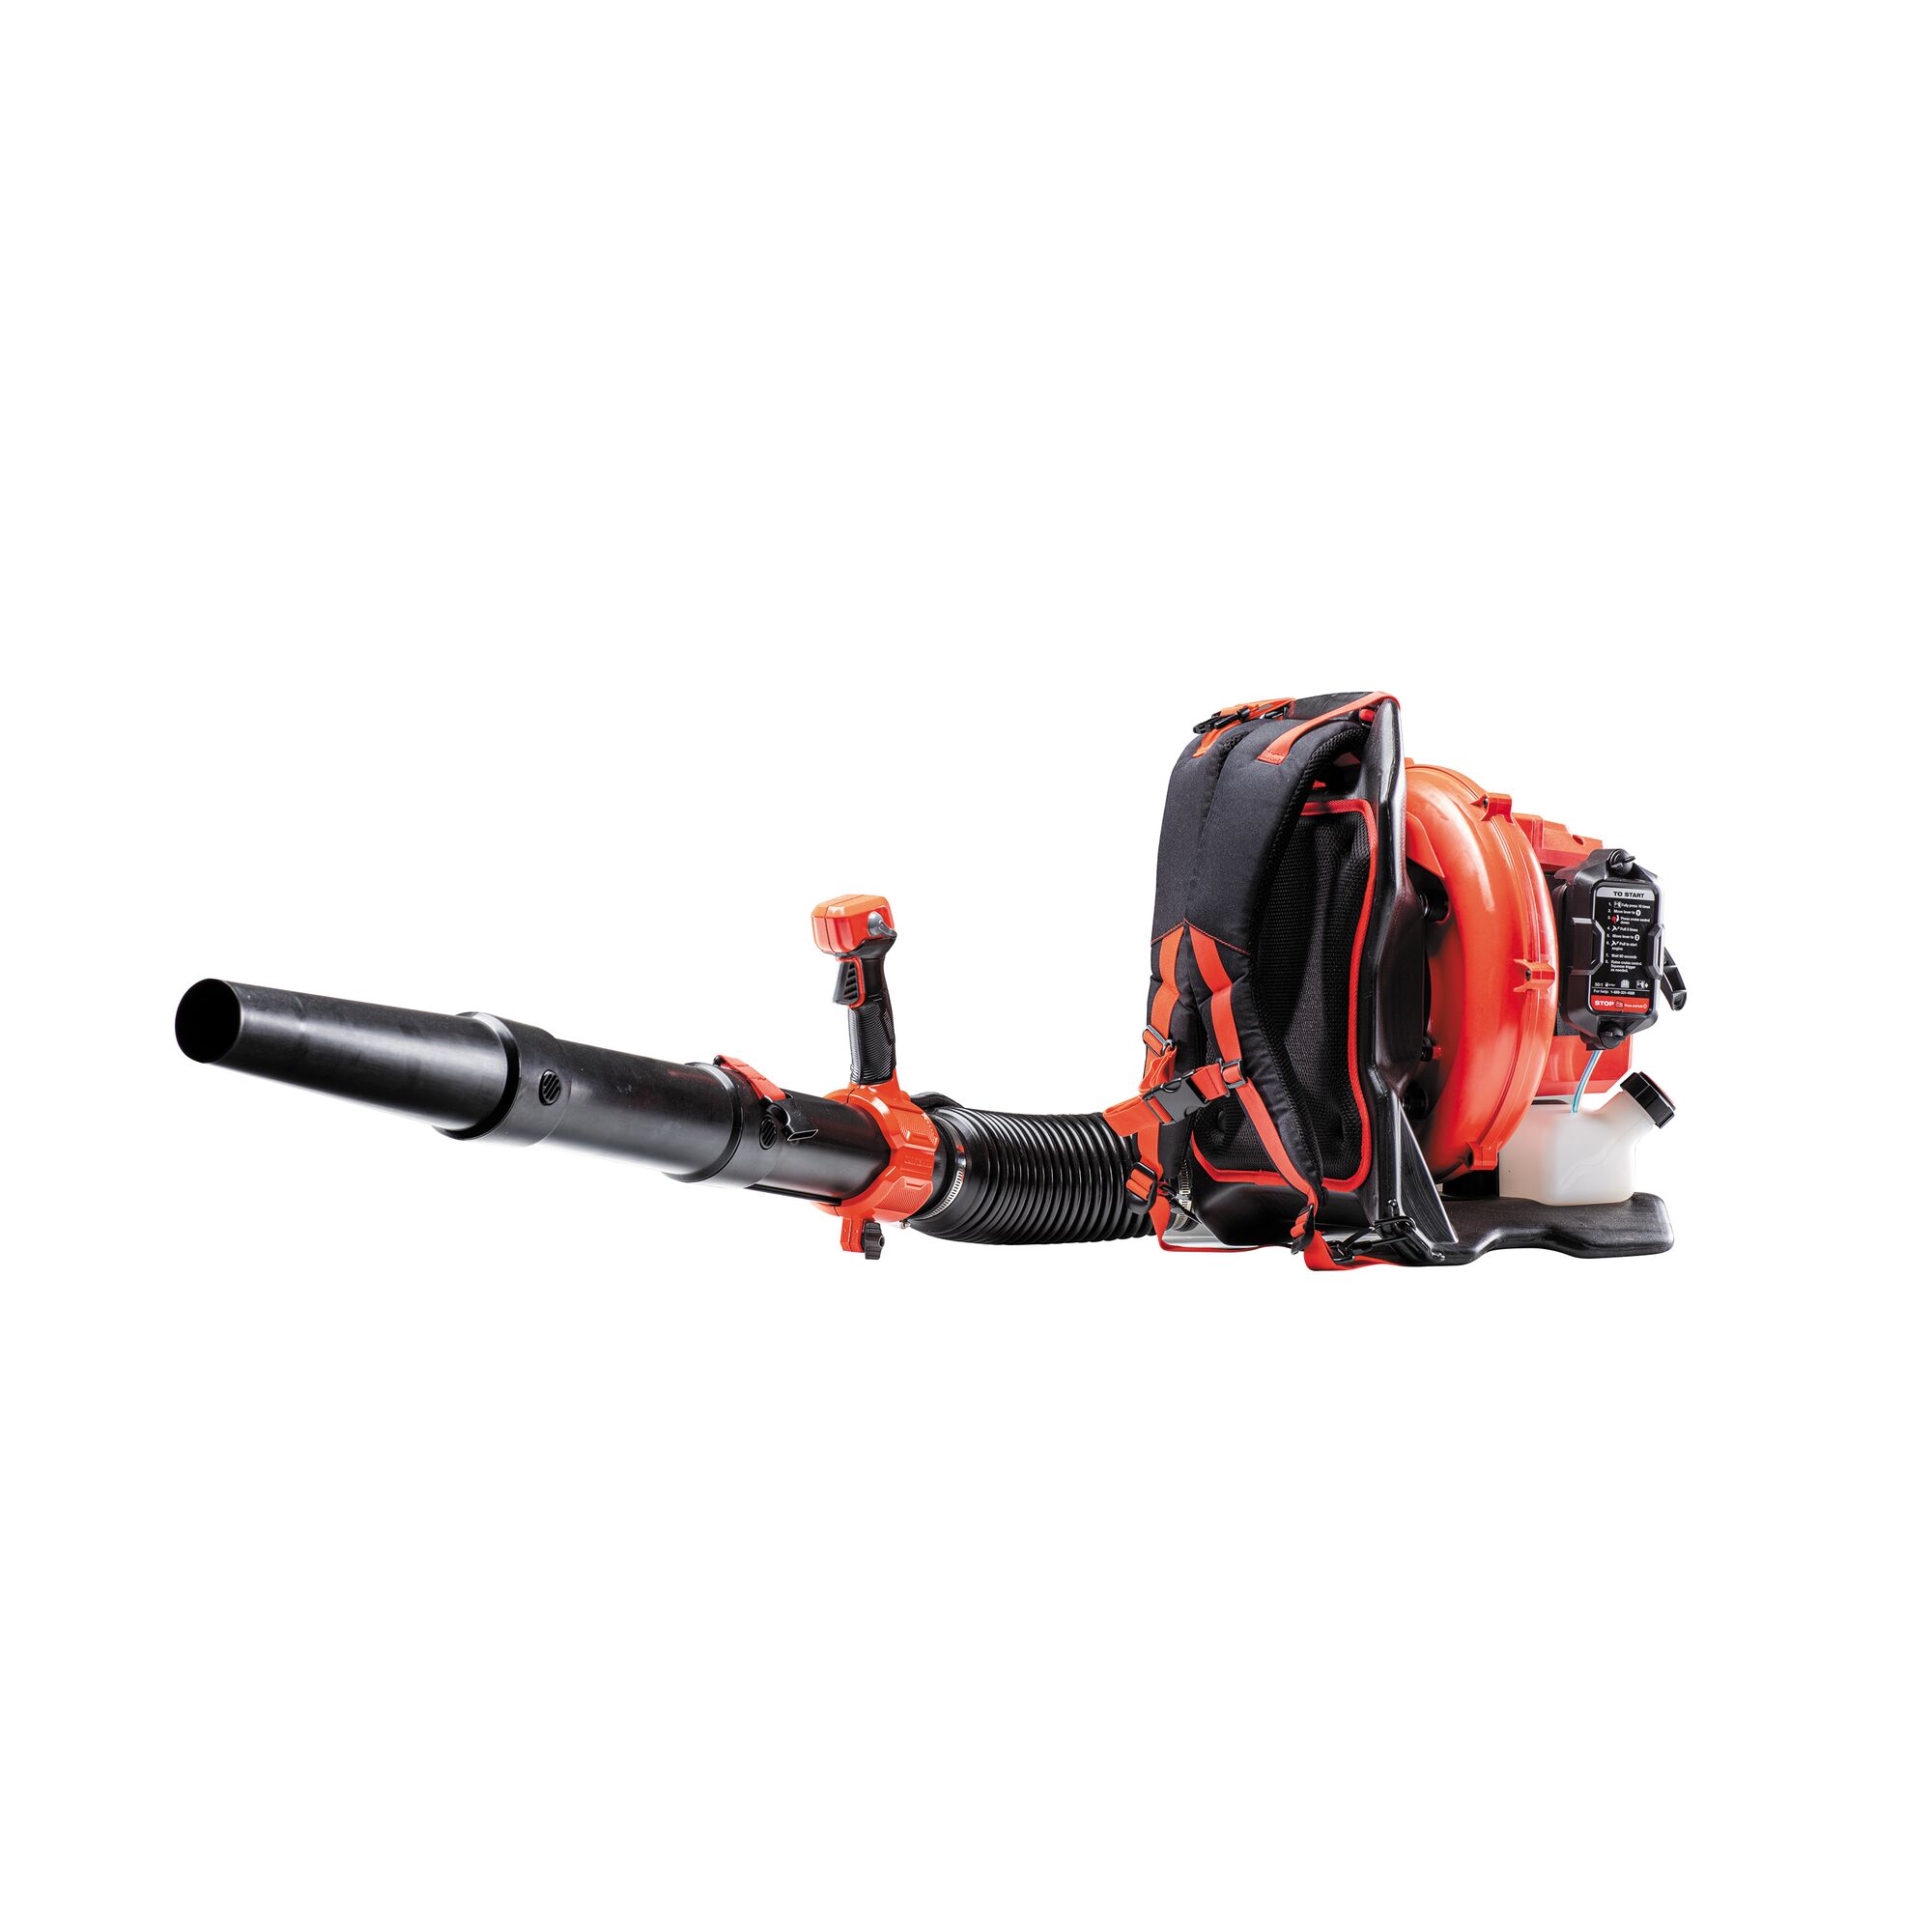 Left profile of 51 C C 2 cycle gas backpack leaf blower.